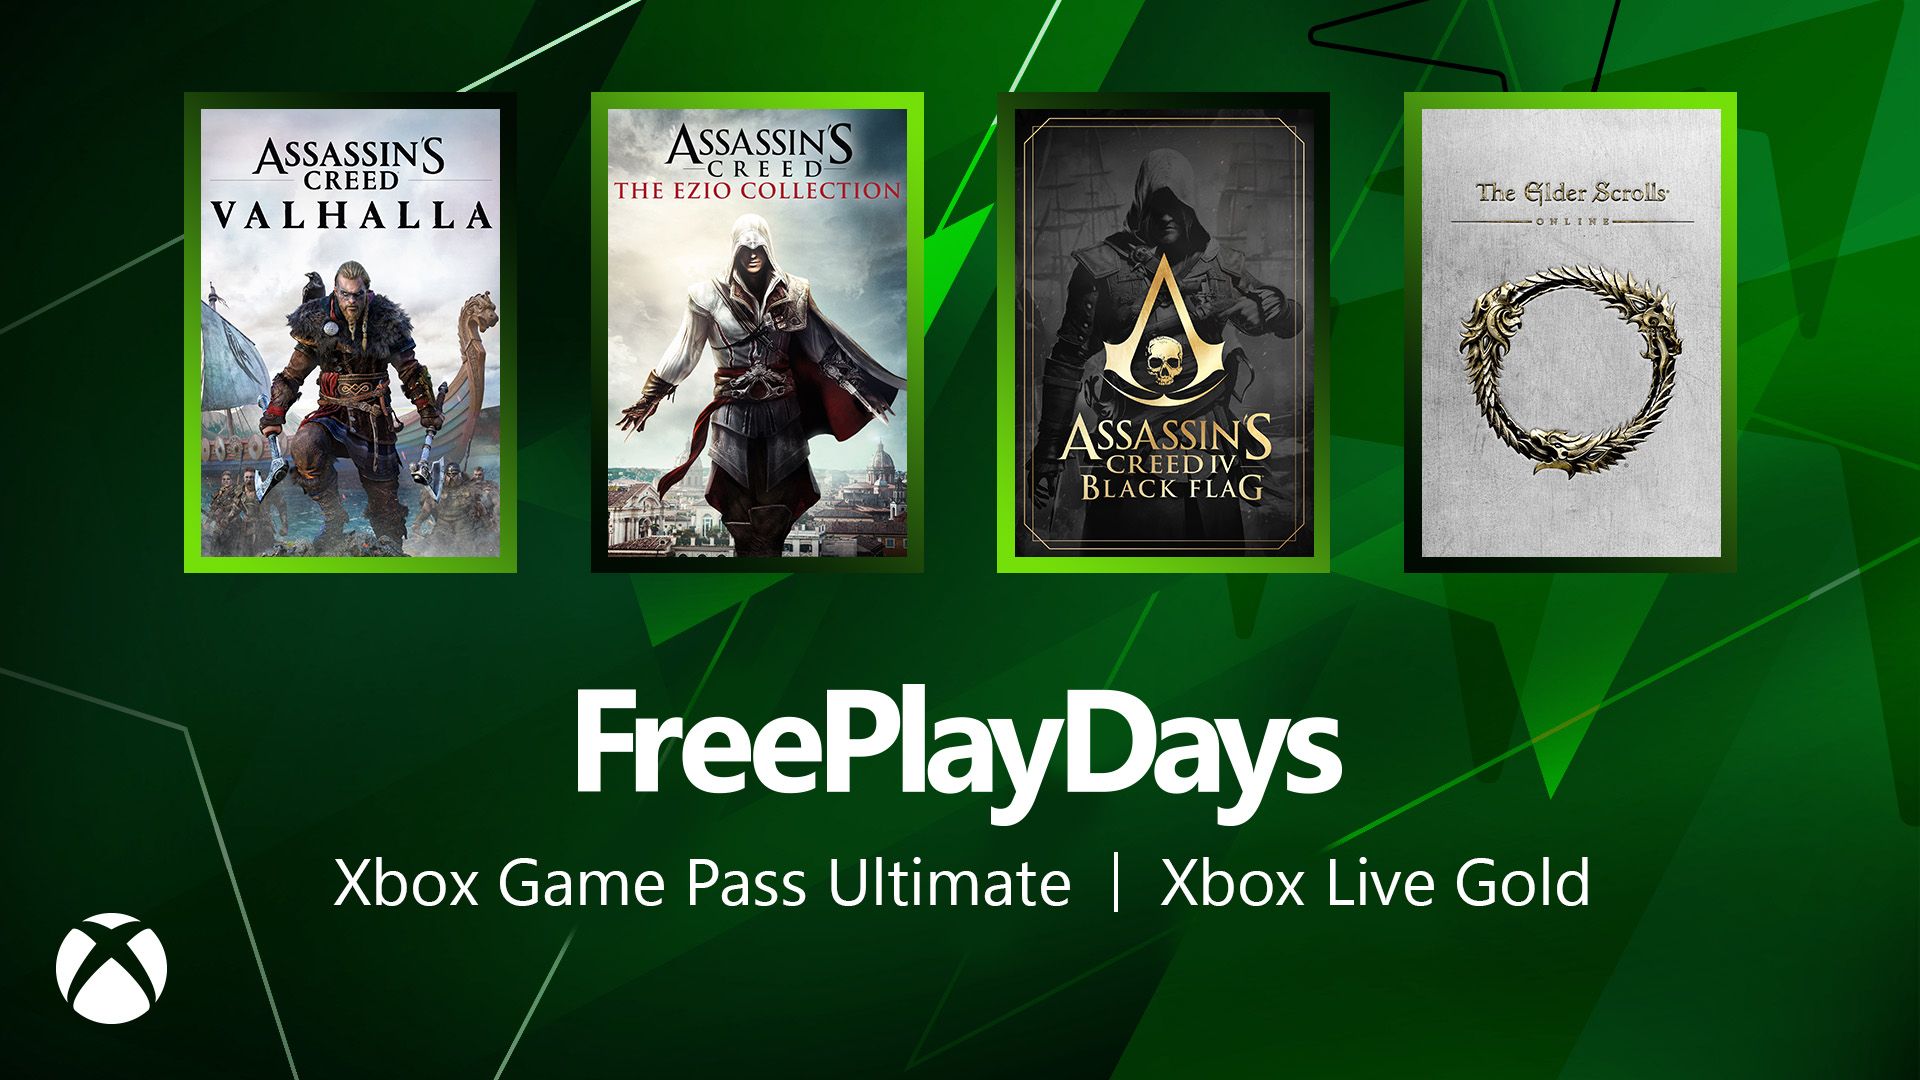 Free Play Days - August 10